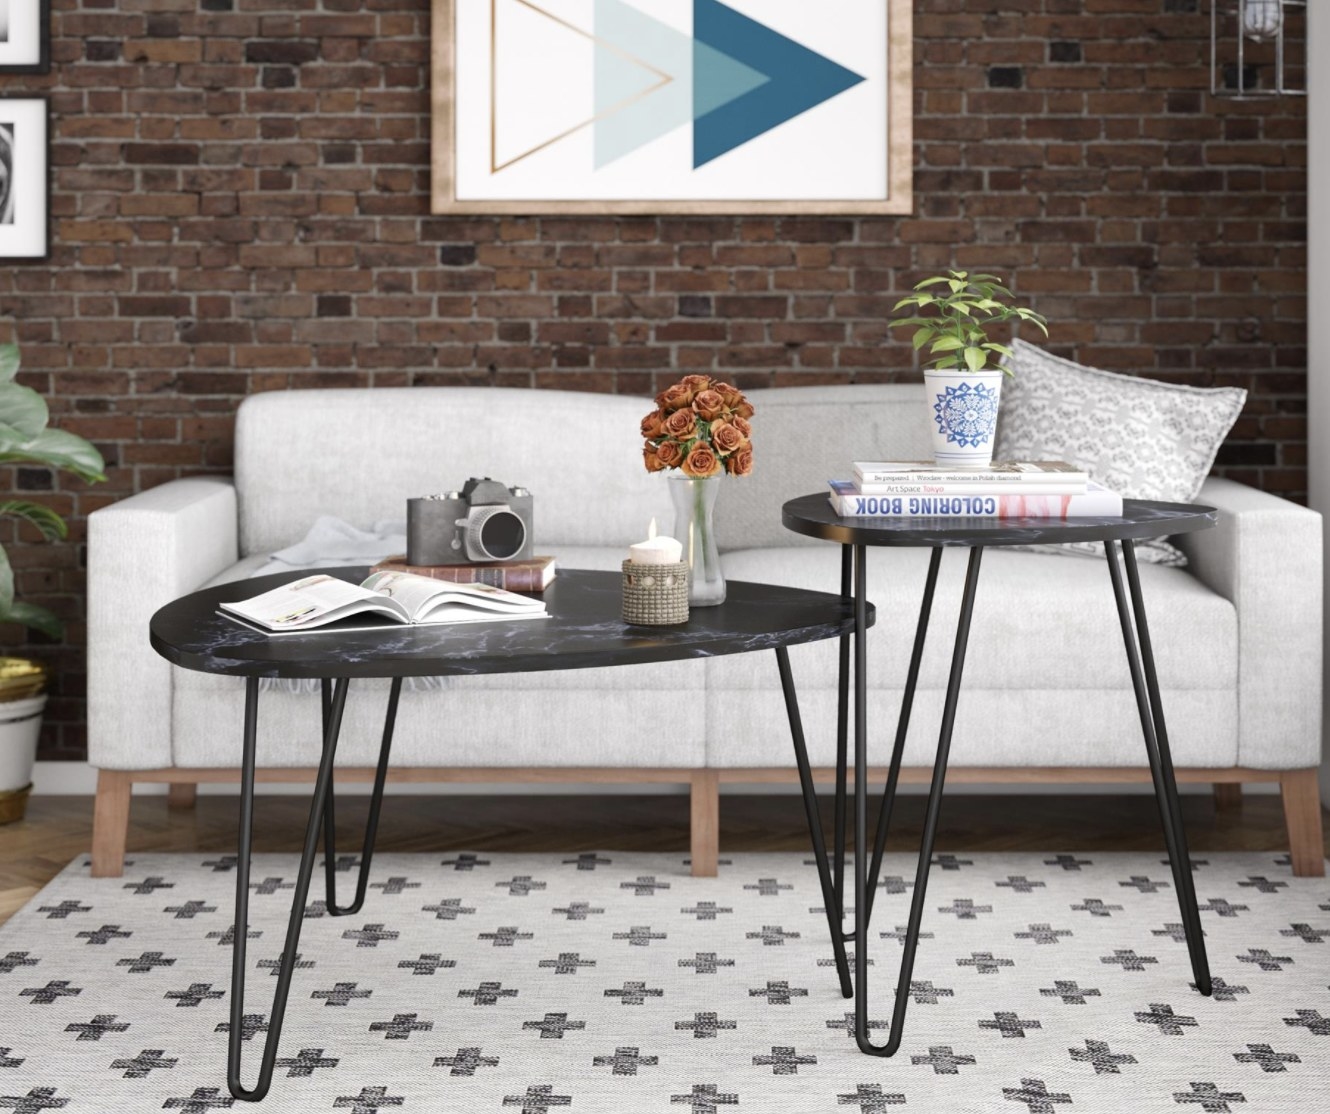 A set of black nesting tables